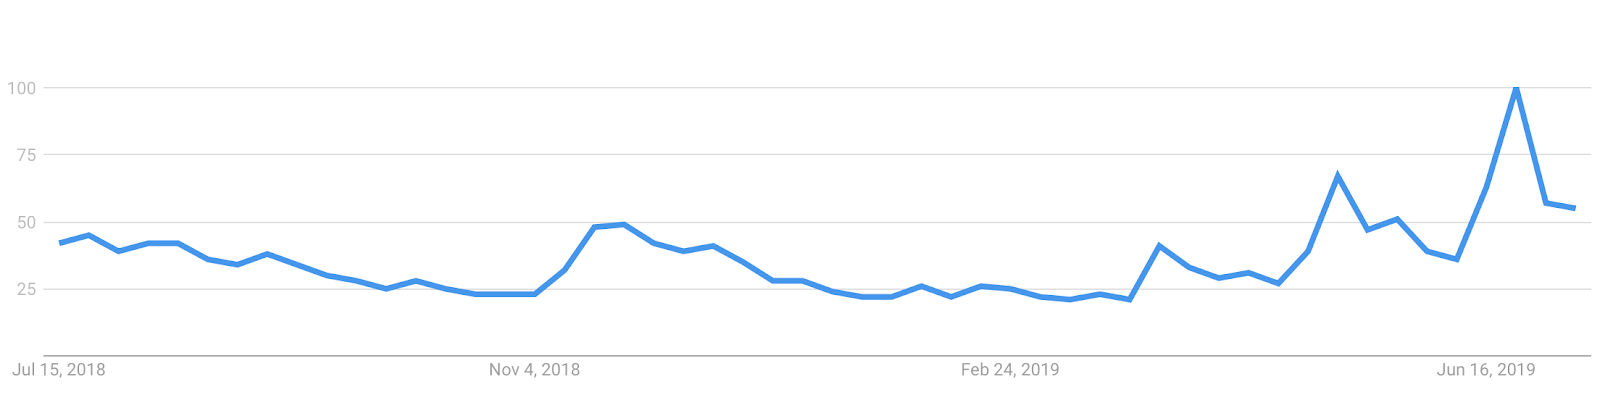 Google search data for Bitcoin in the U.S. Source: Google Trends